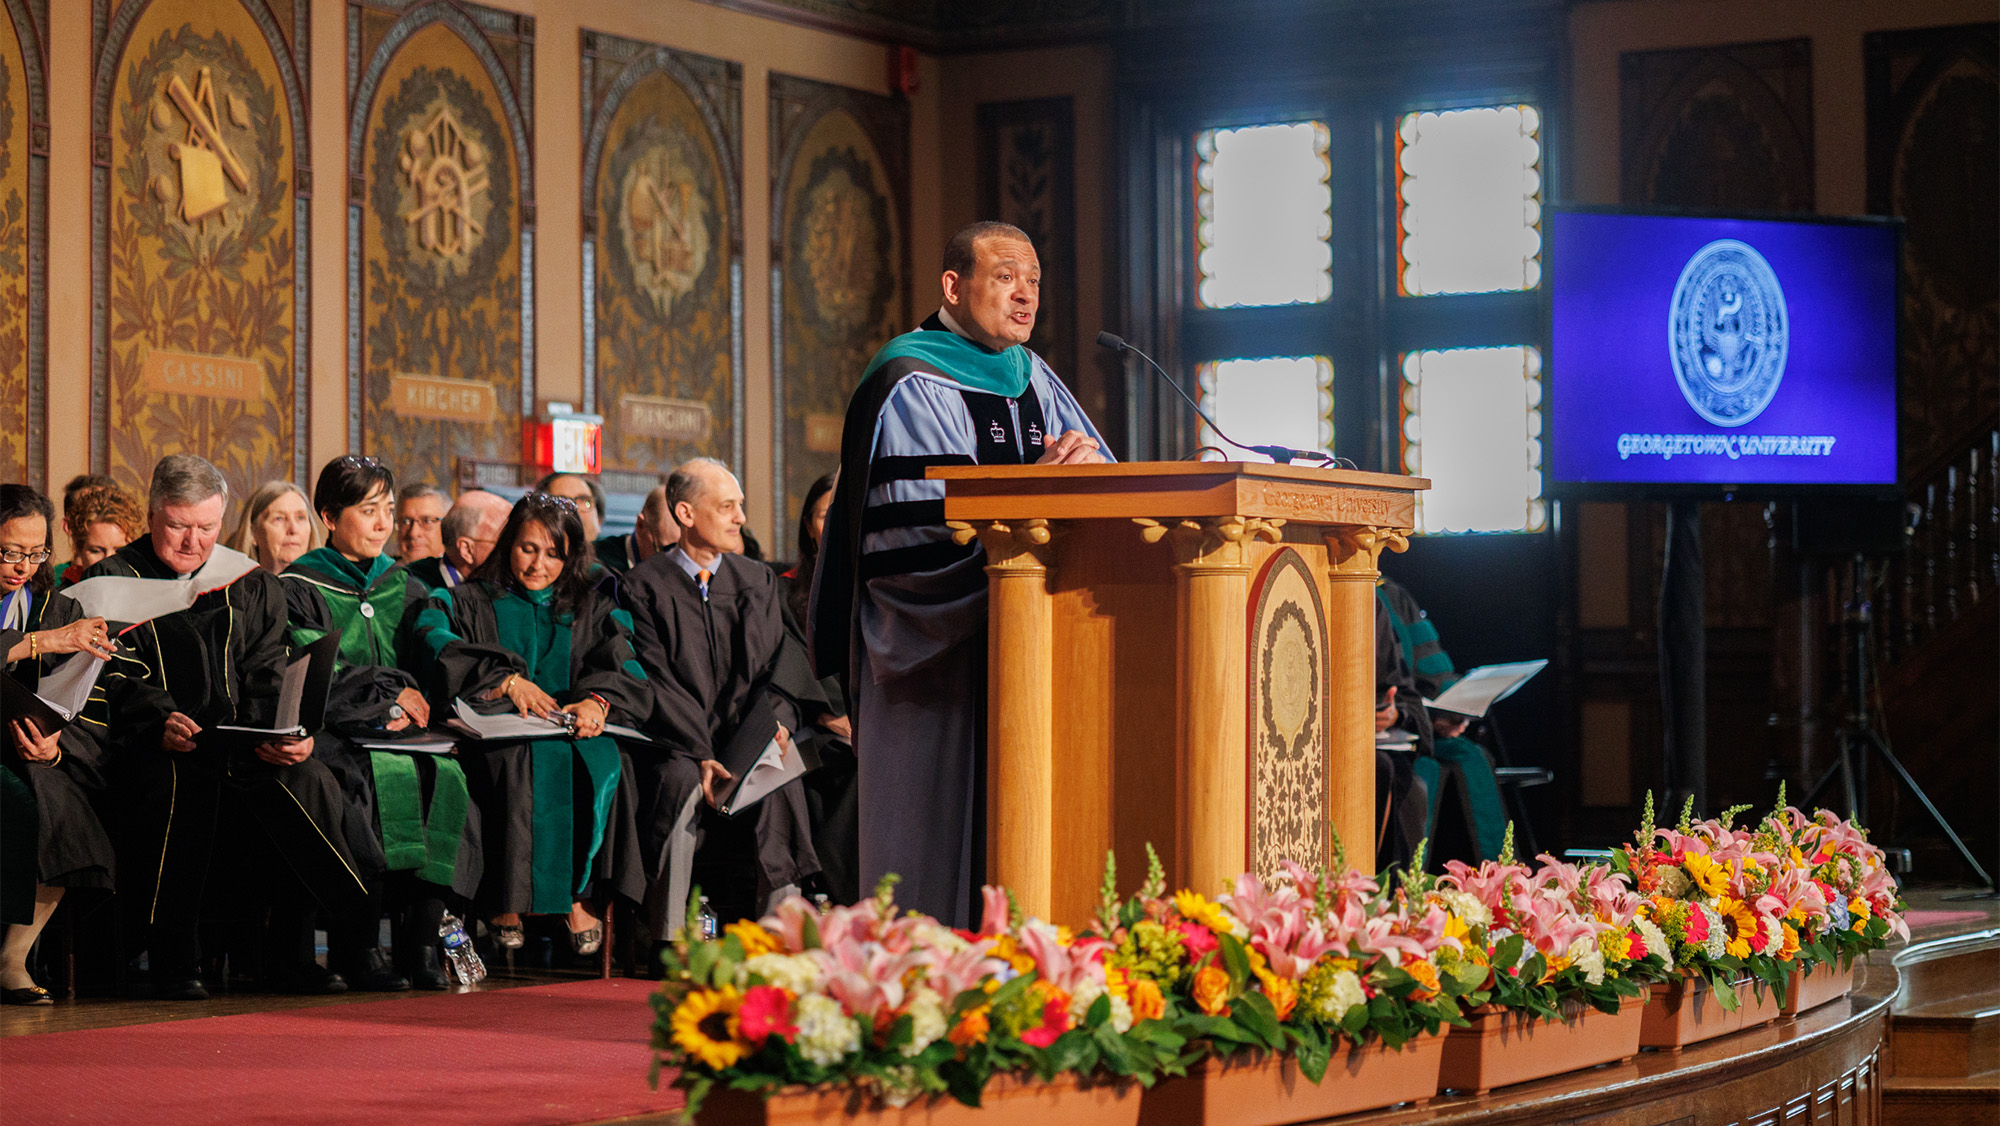 Dean Jones speaks at a podium on the stage of Gaston Hall with SOM faculty seated behind him